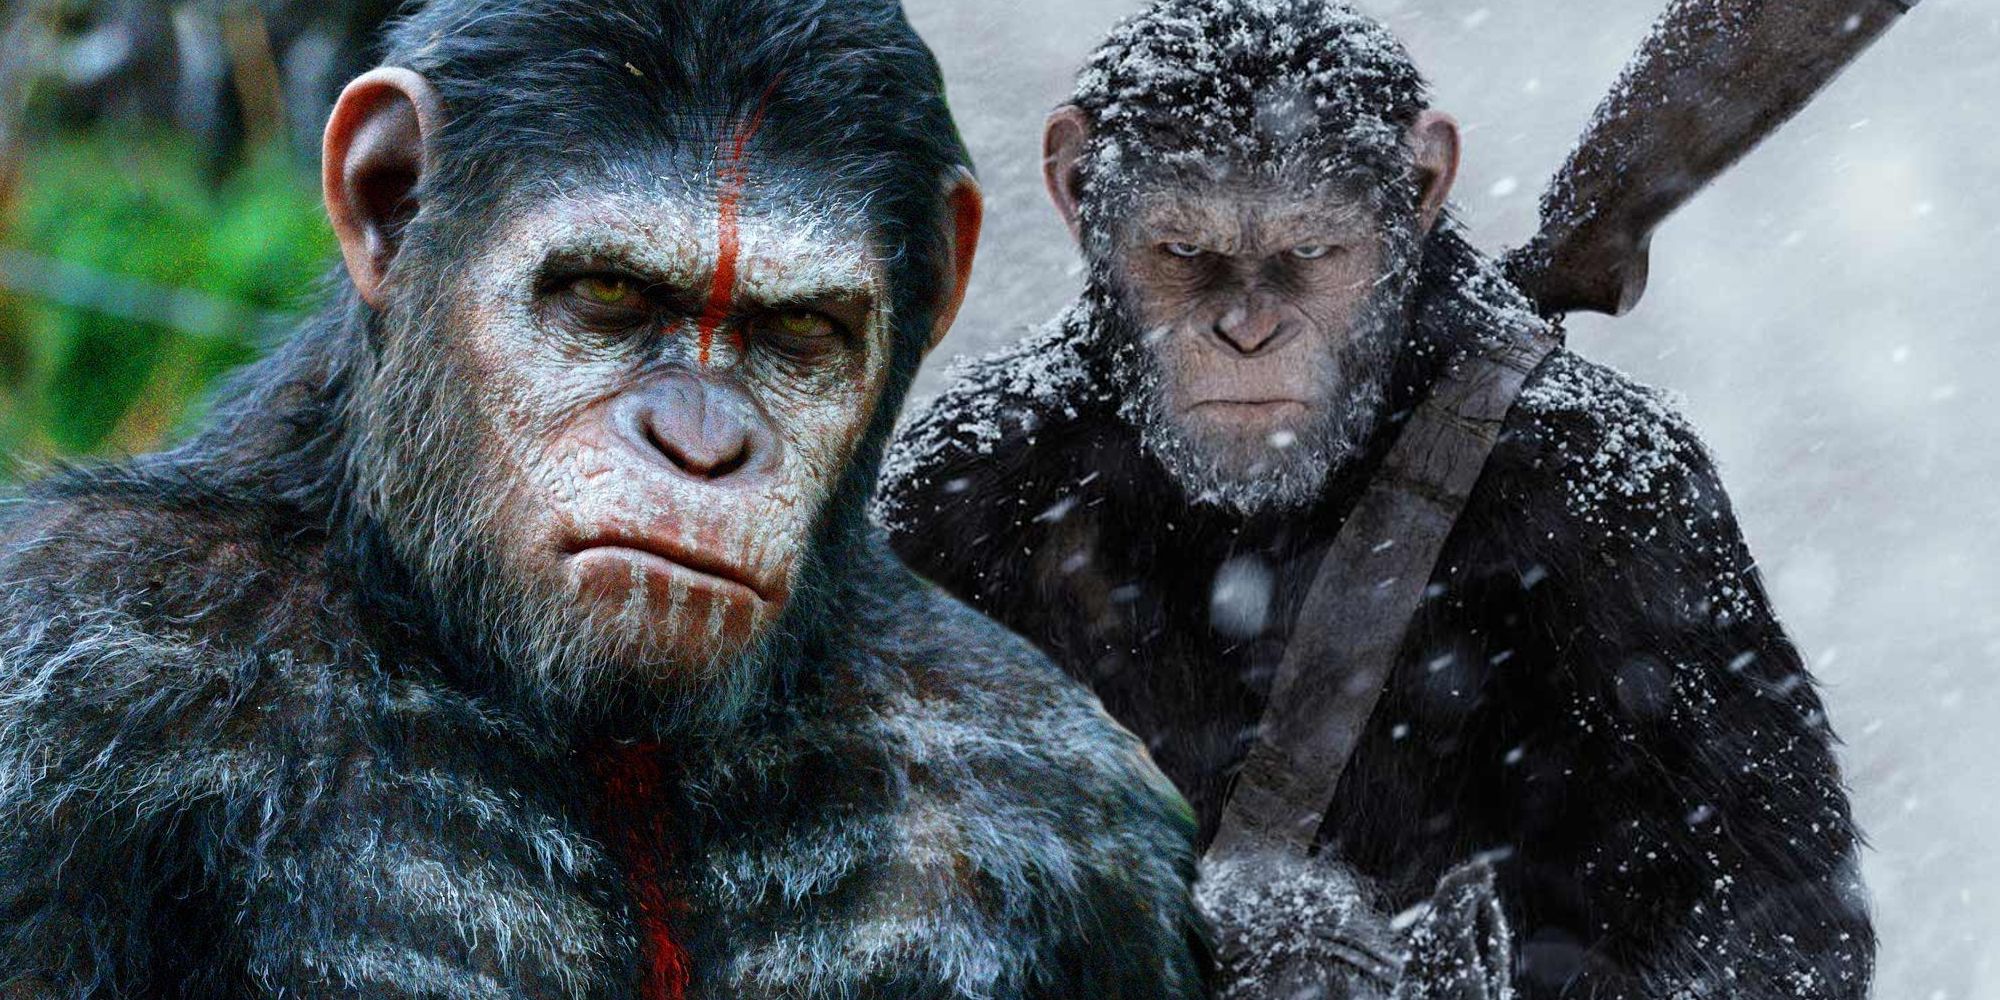 Caesar in Dawn of the Planet of the Apes and War for the Planet of the Apes